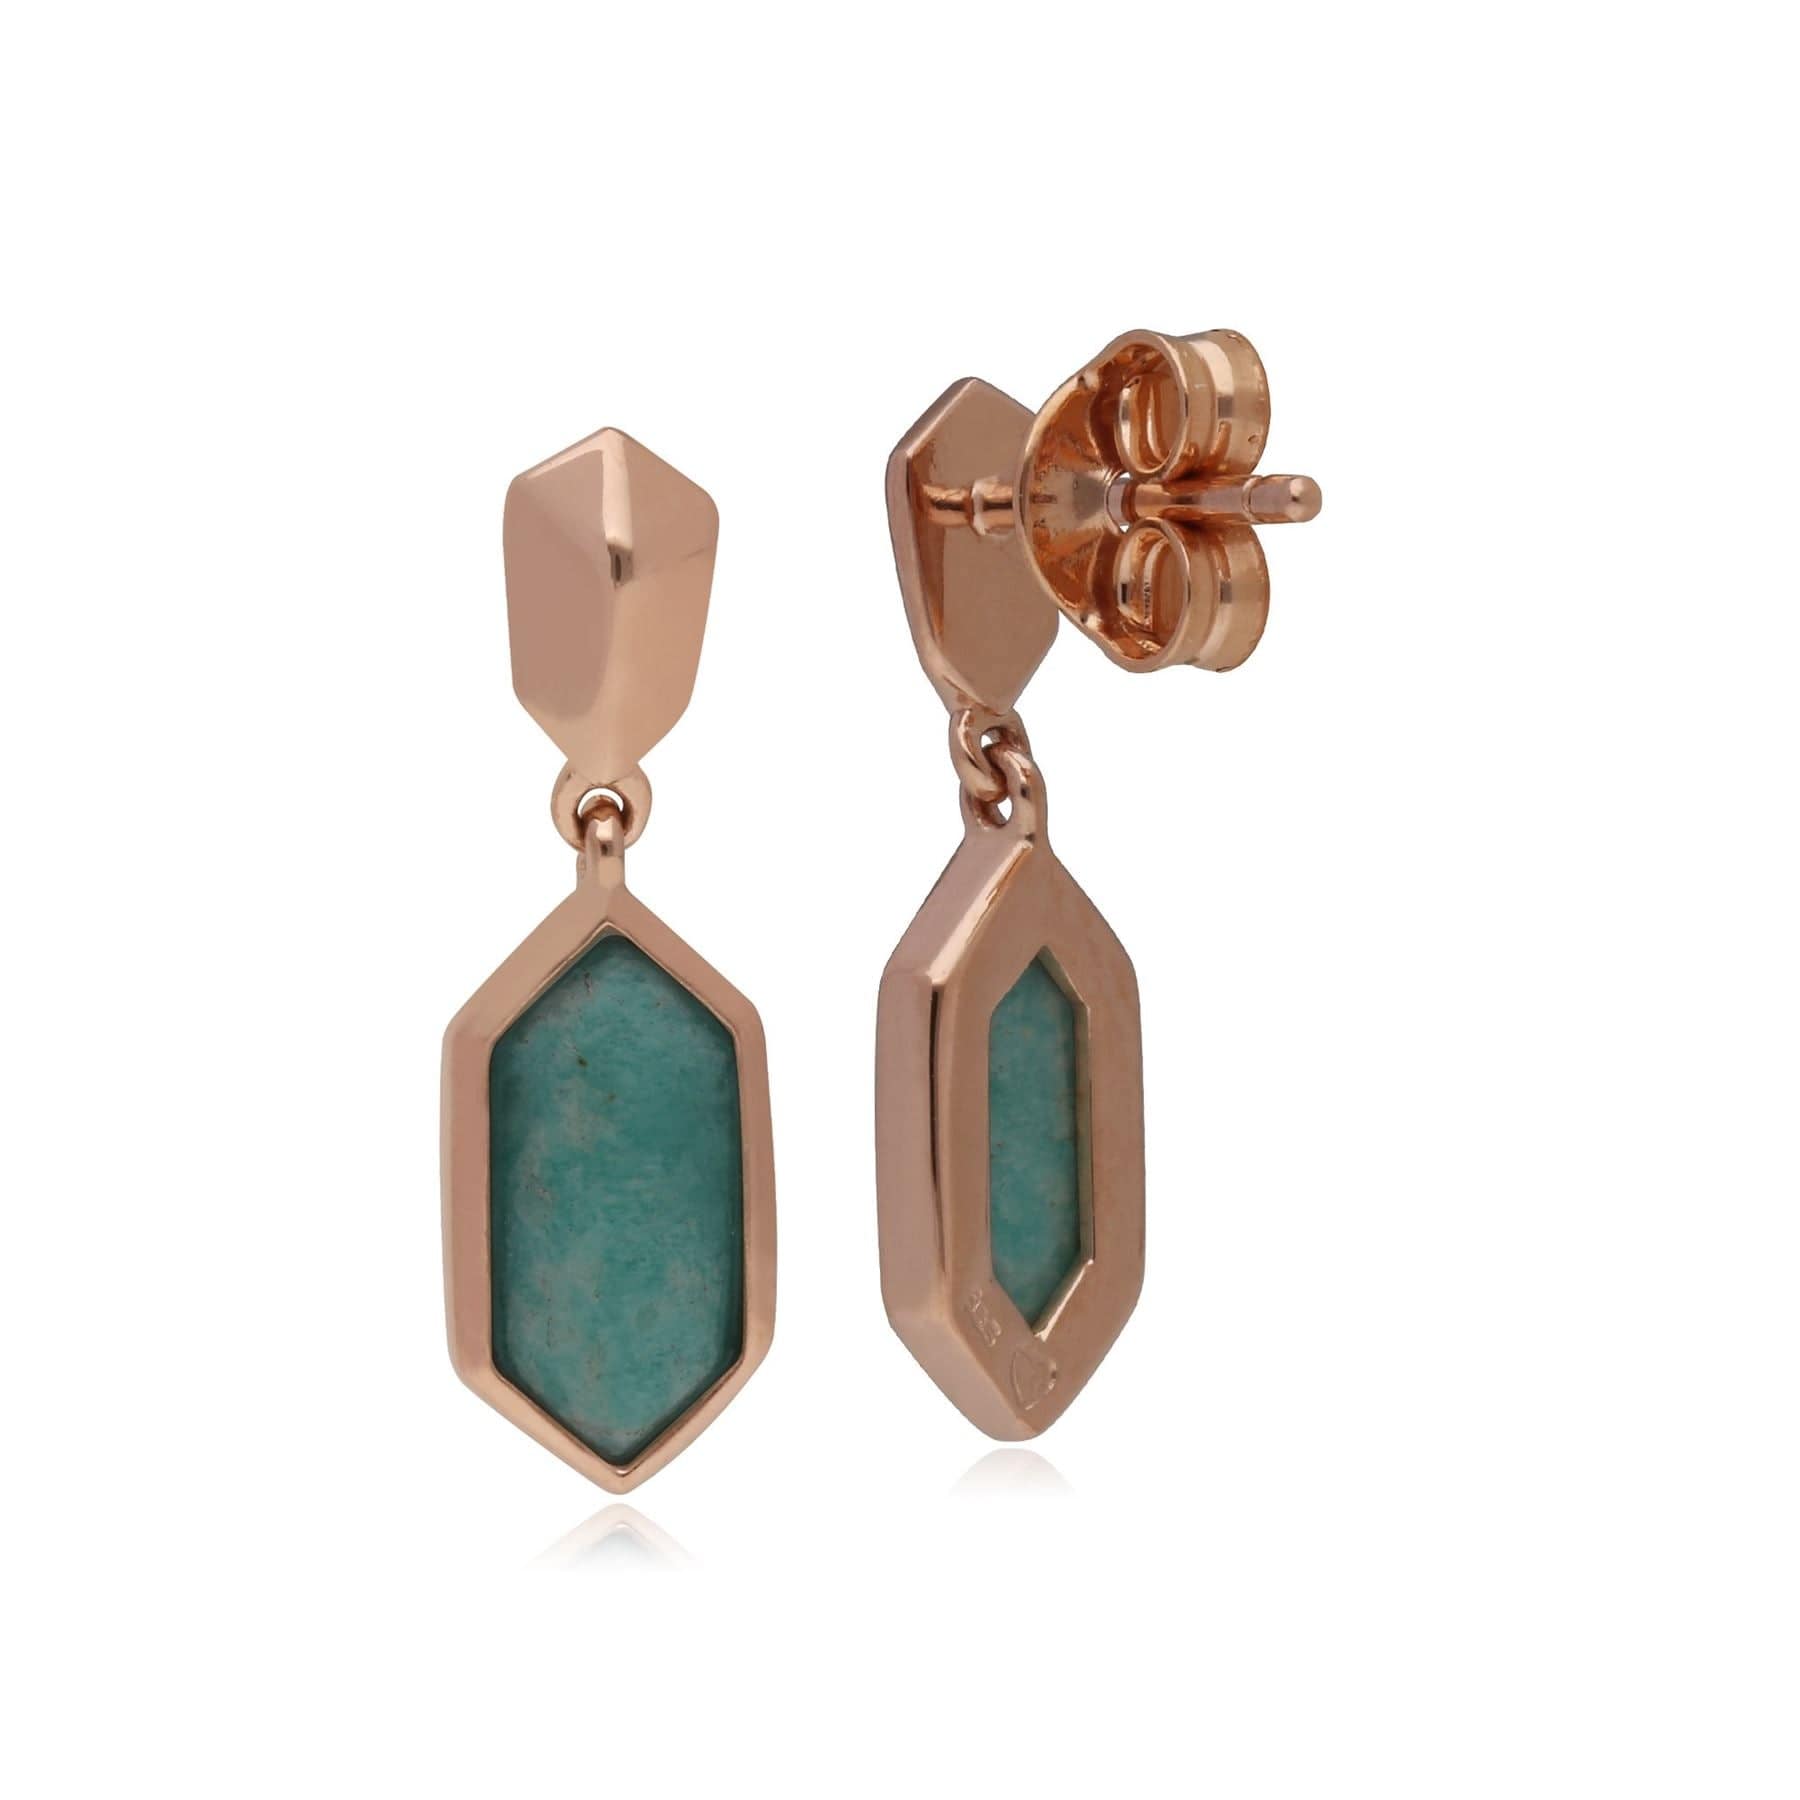 270E029102925 Micro Statement Amazonite Drop Earrings in Rose Gold Plated 925 Sterling Silver 1